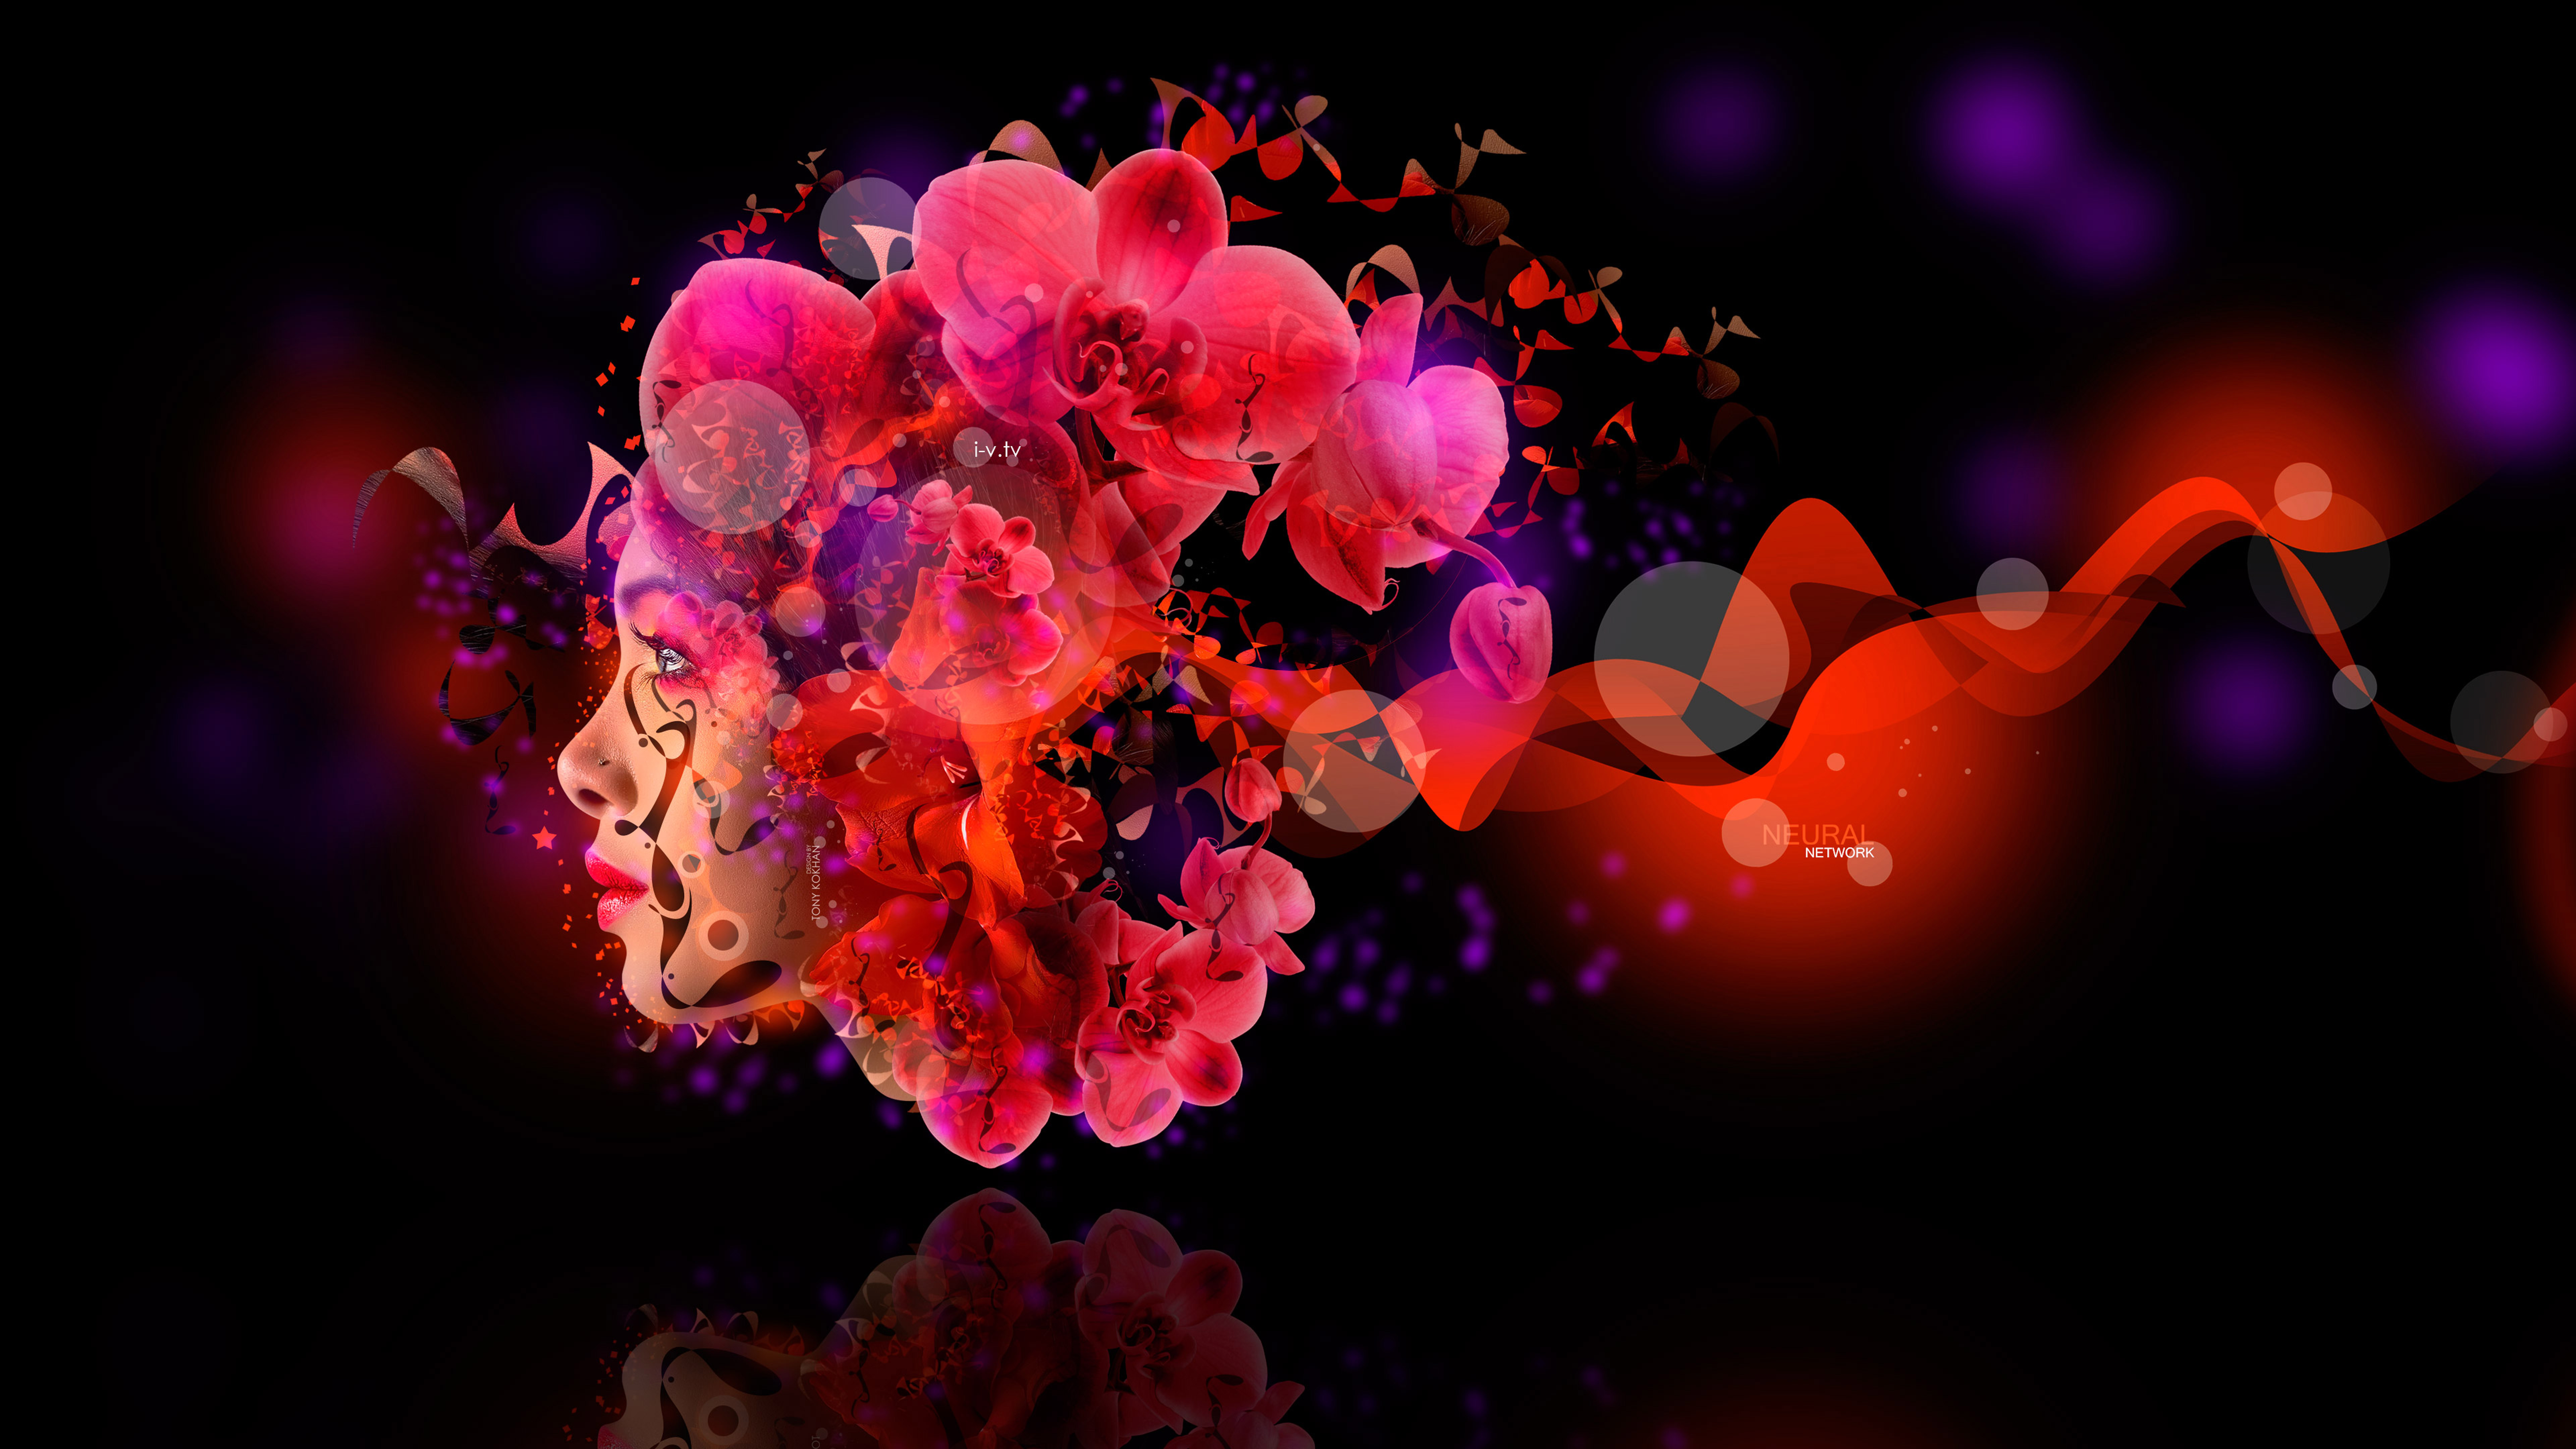 Neural-Network-Fantasy-Fly-Head-Girl-Flowers-Super-MakeUp-Tattoo-Plastic-Effects-TonyFlowers-Orchid-Art